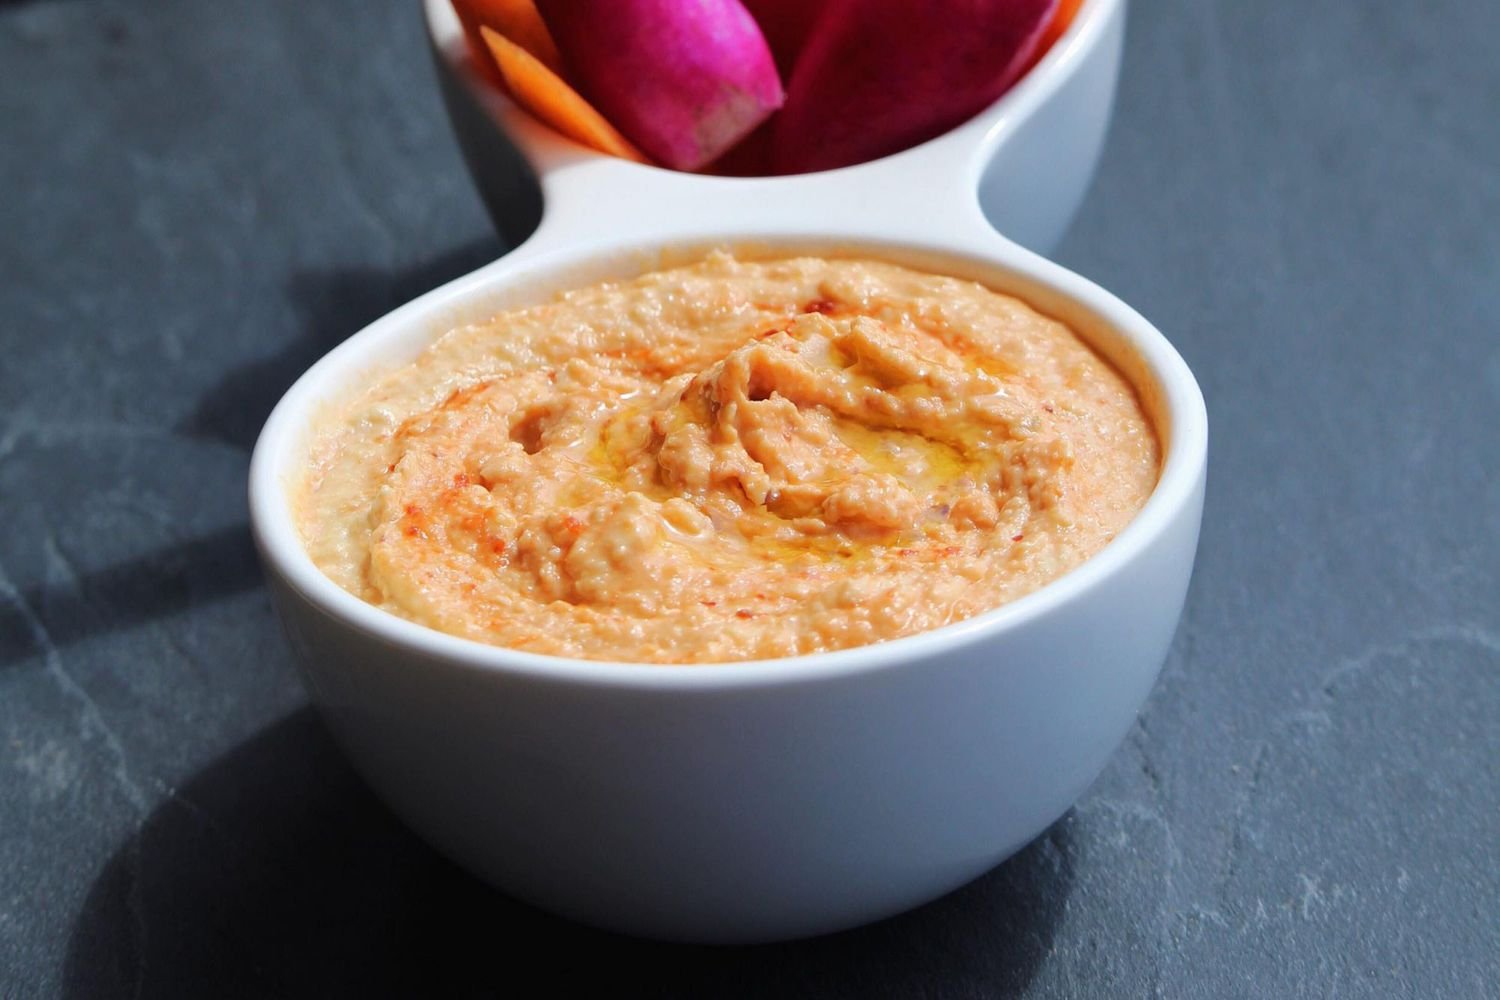 6 Tips for Making Delicious Hummus Every Time